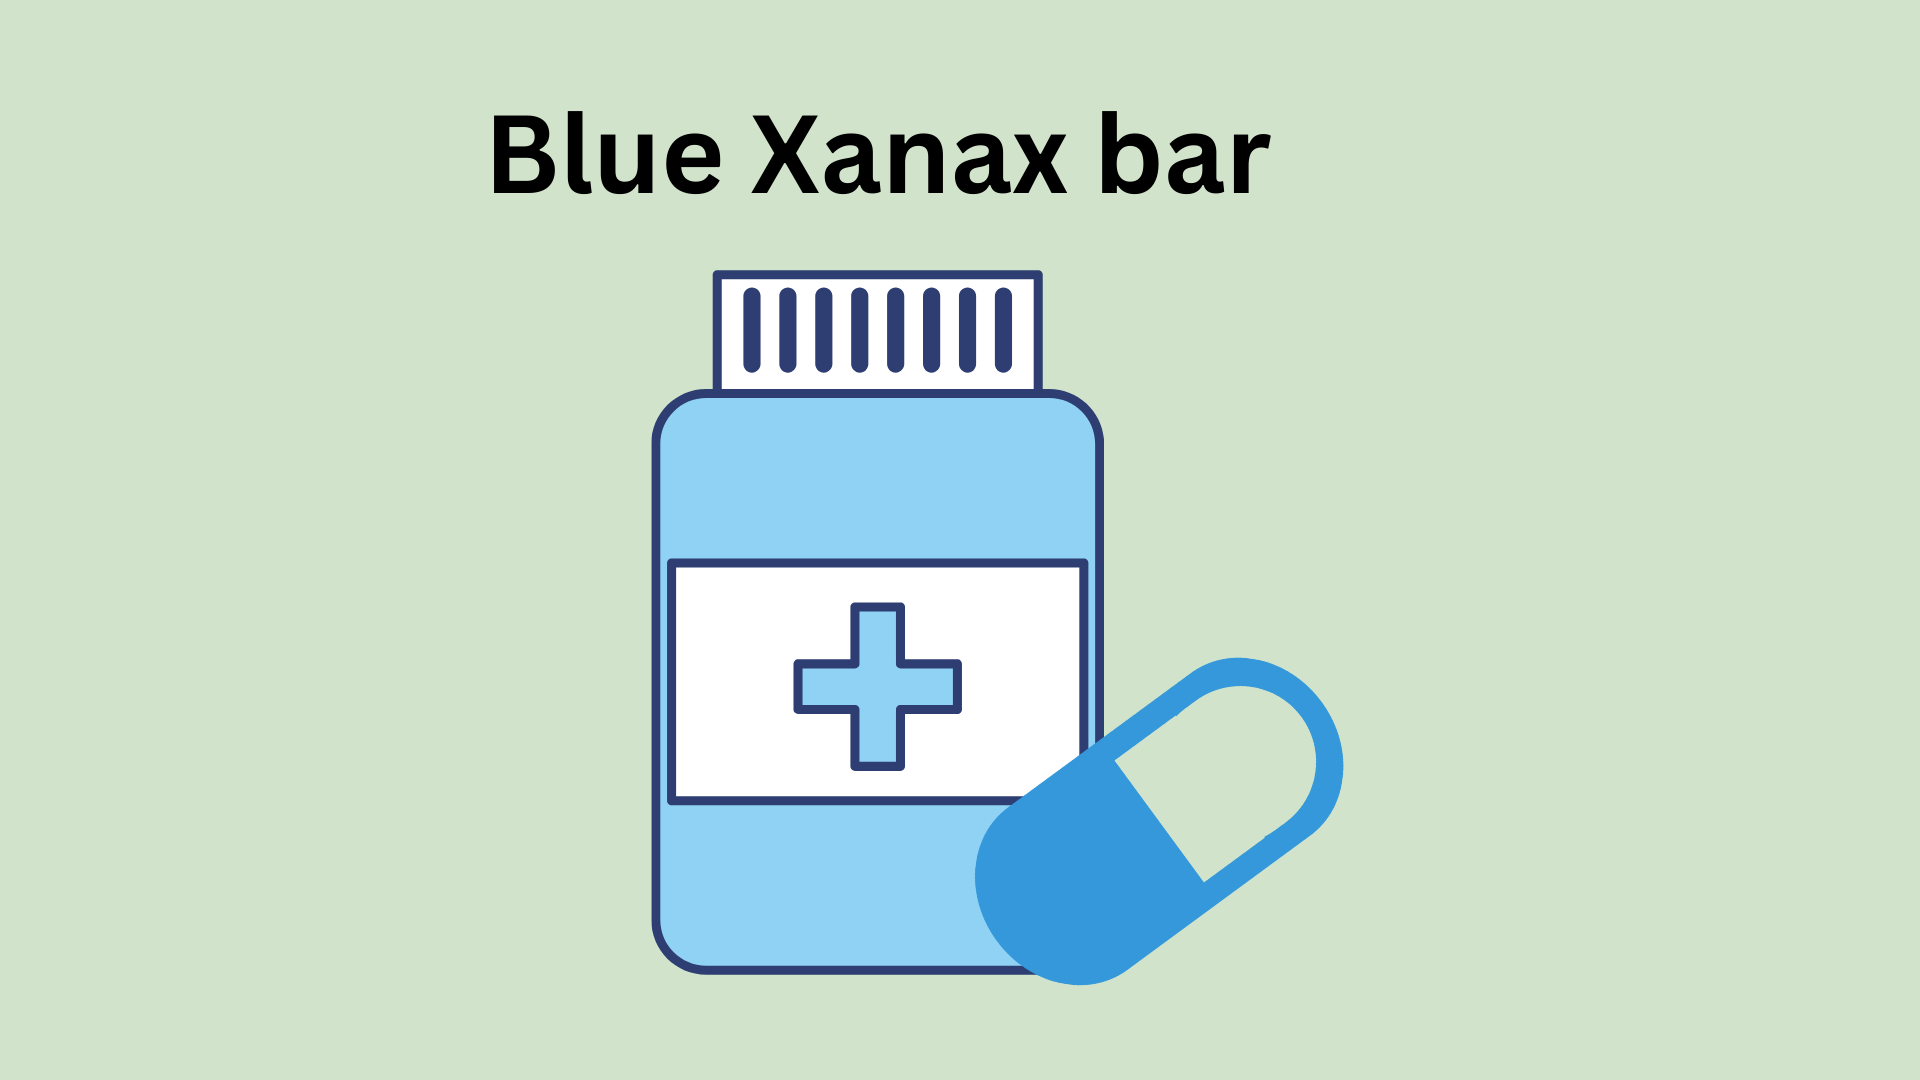 Everything about Blue Xanax bar 2